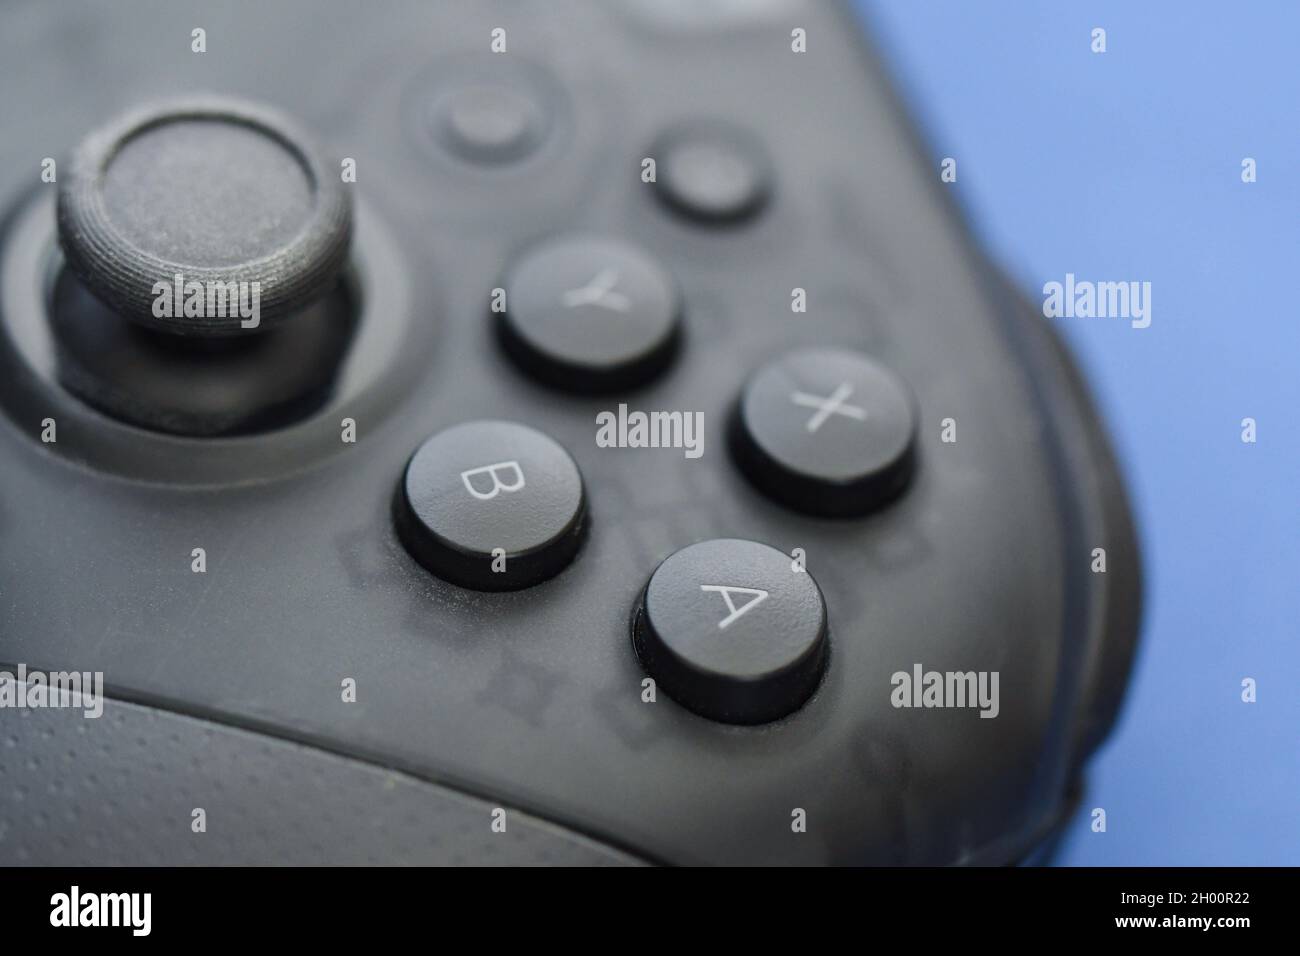 Photo of a gaming controller on blue background Stock Photo